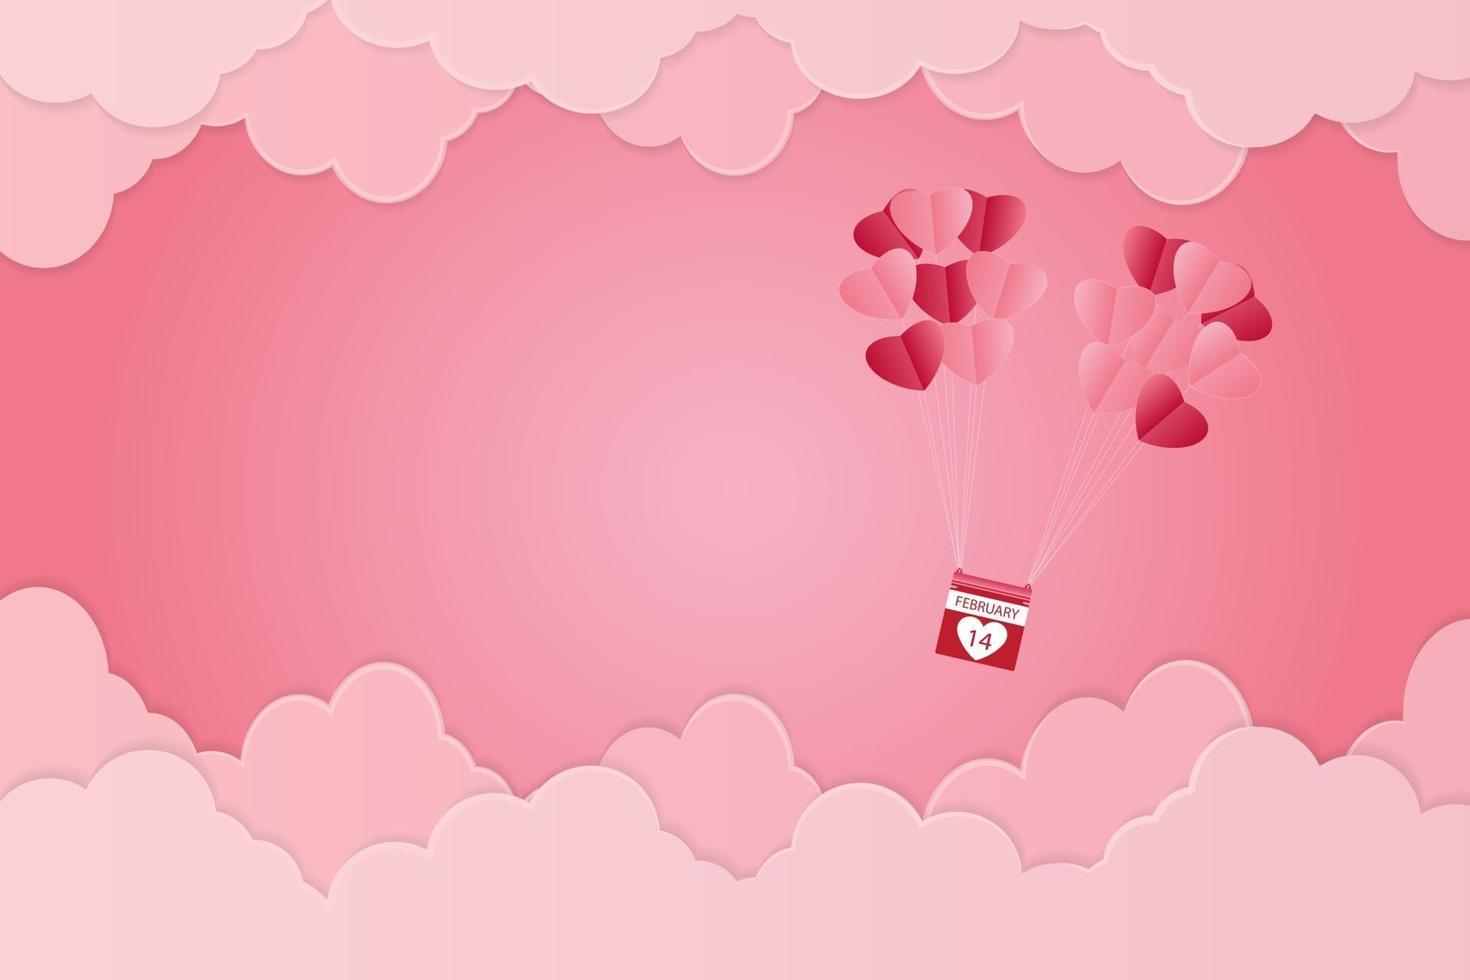 Valentine's day, heart-shaped balloon floating in the sky, pink background, paper art vector